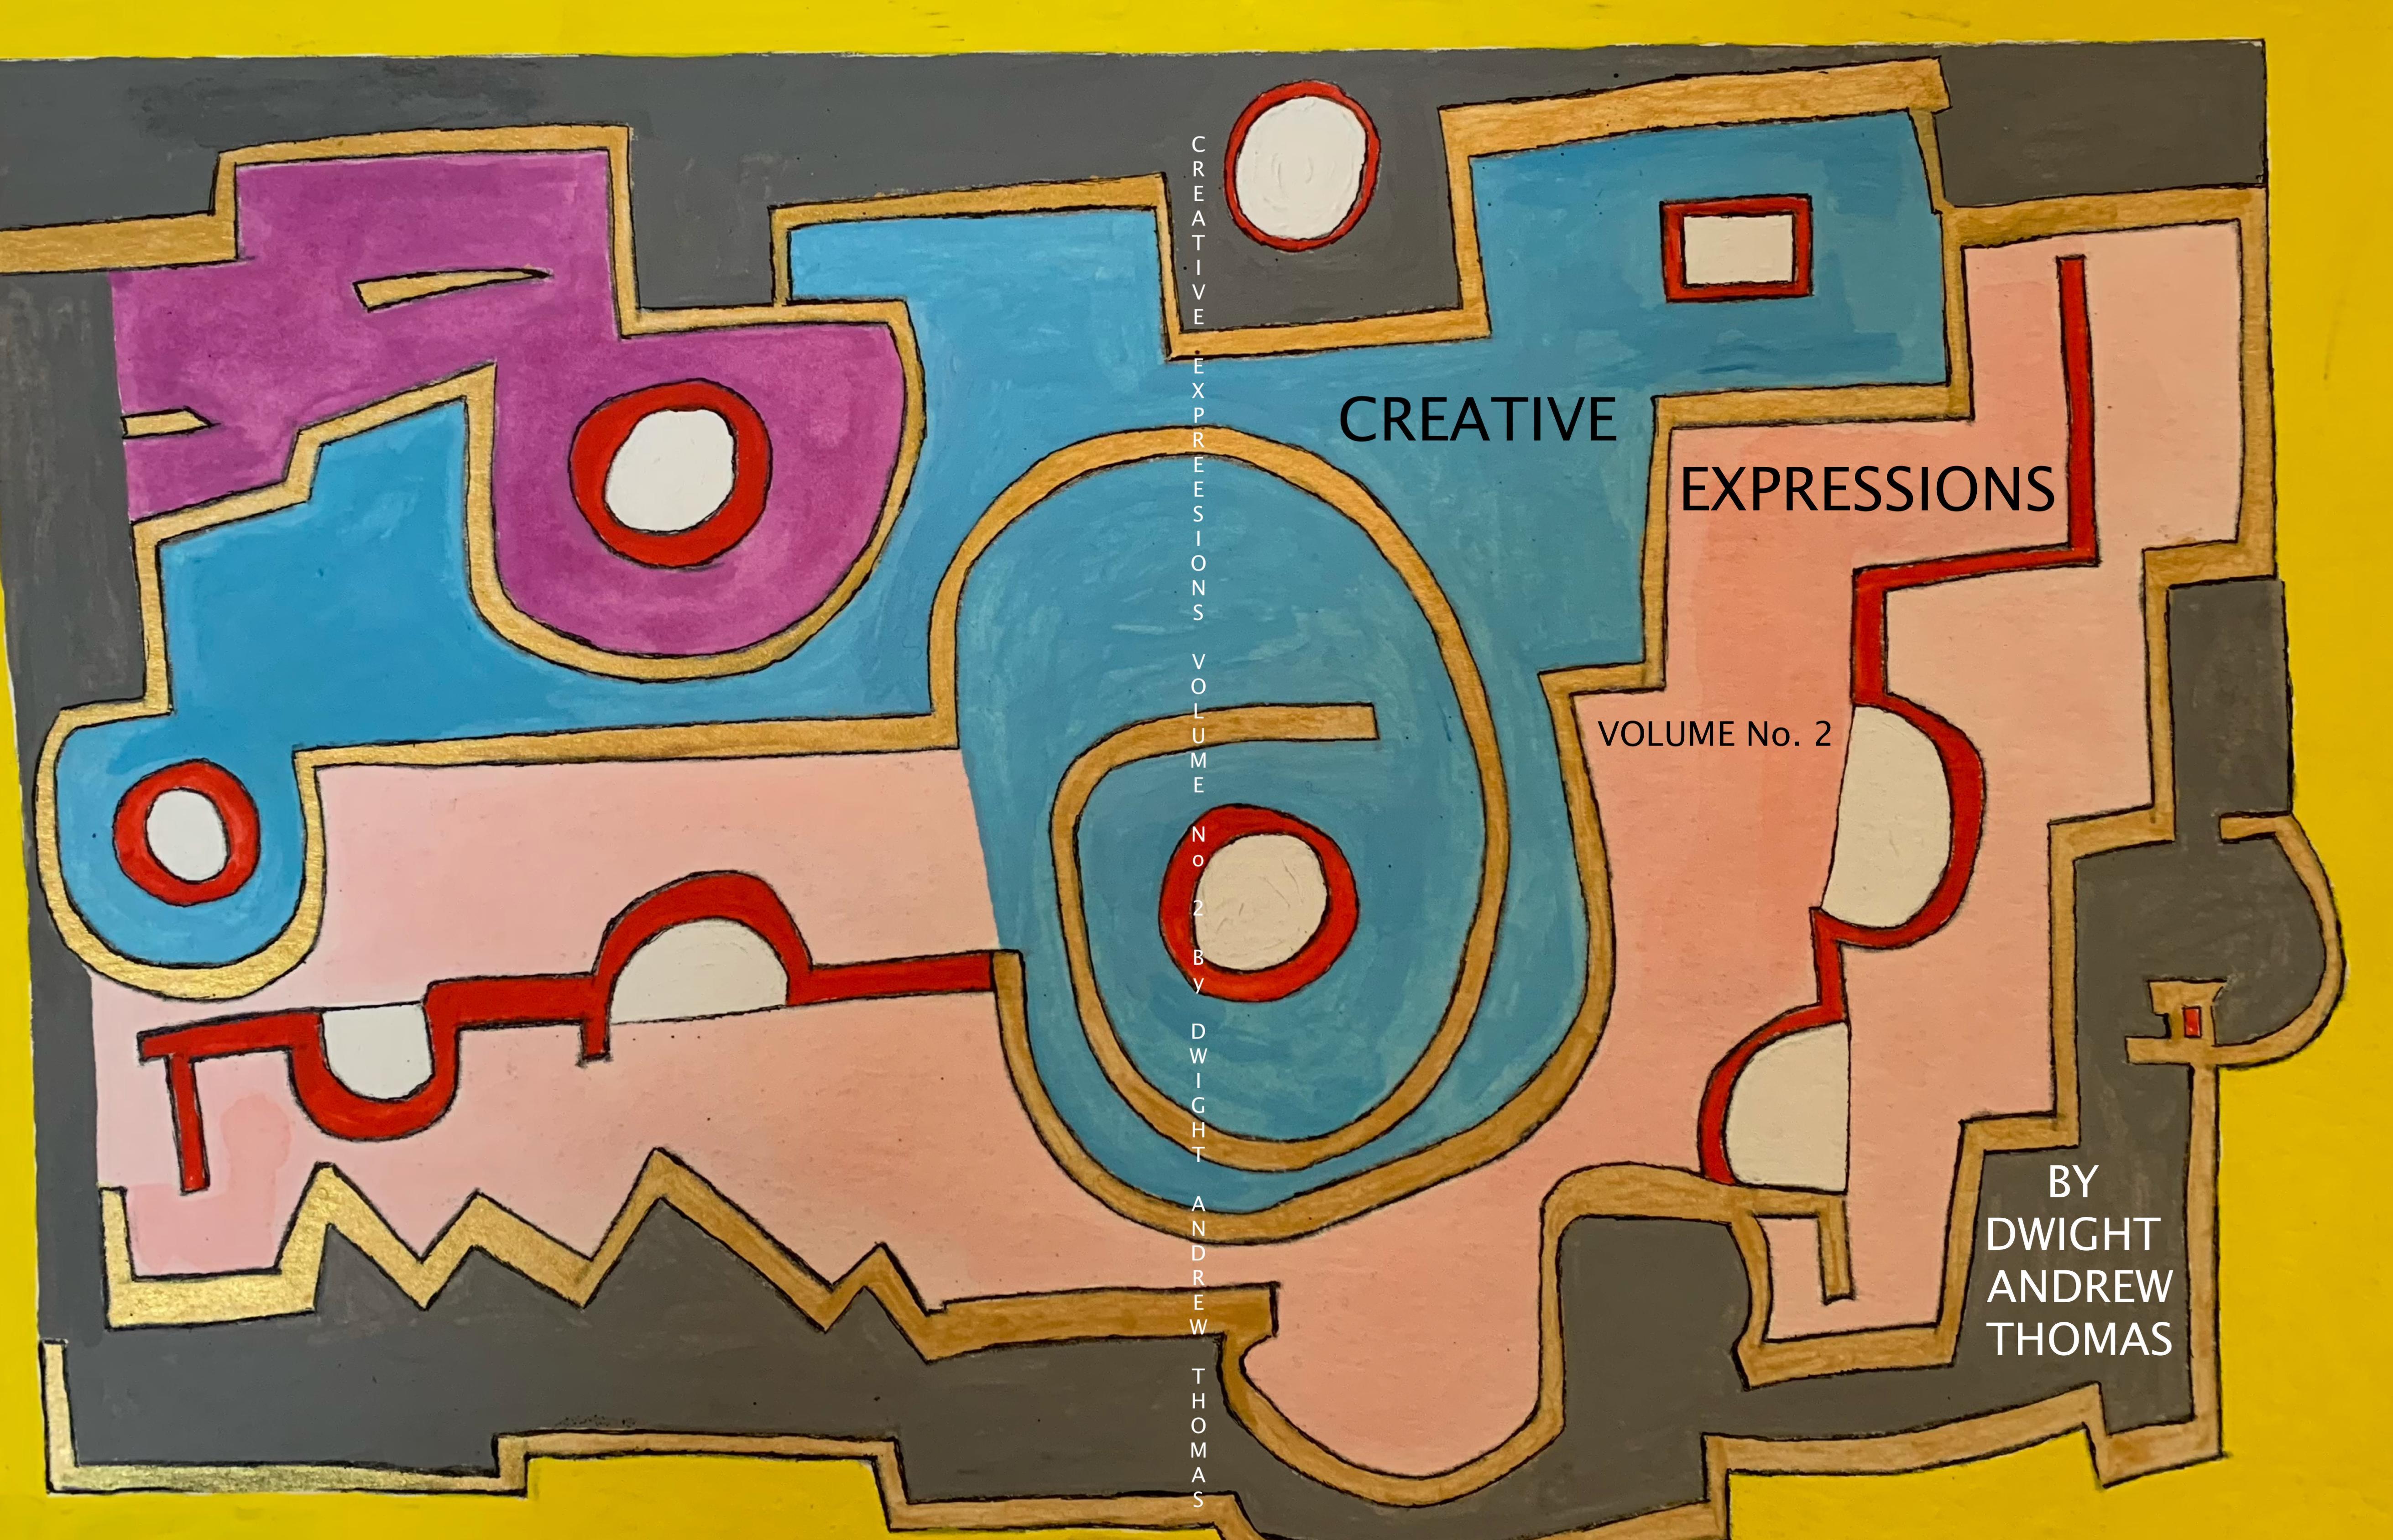 Creative Expressions Volume No. 2 cover image